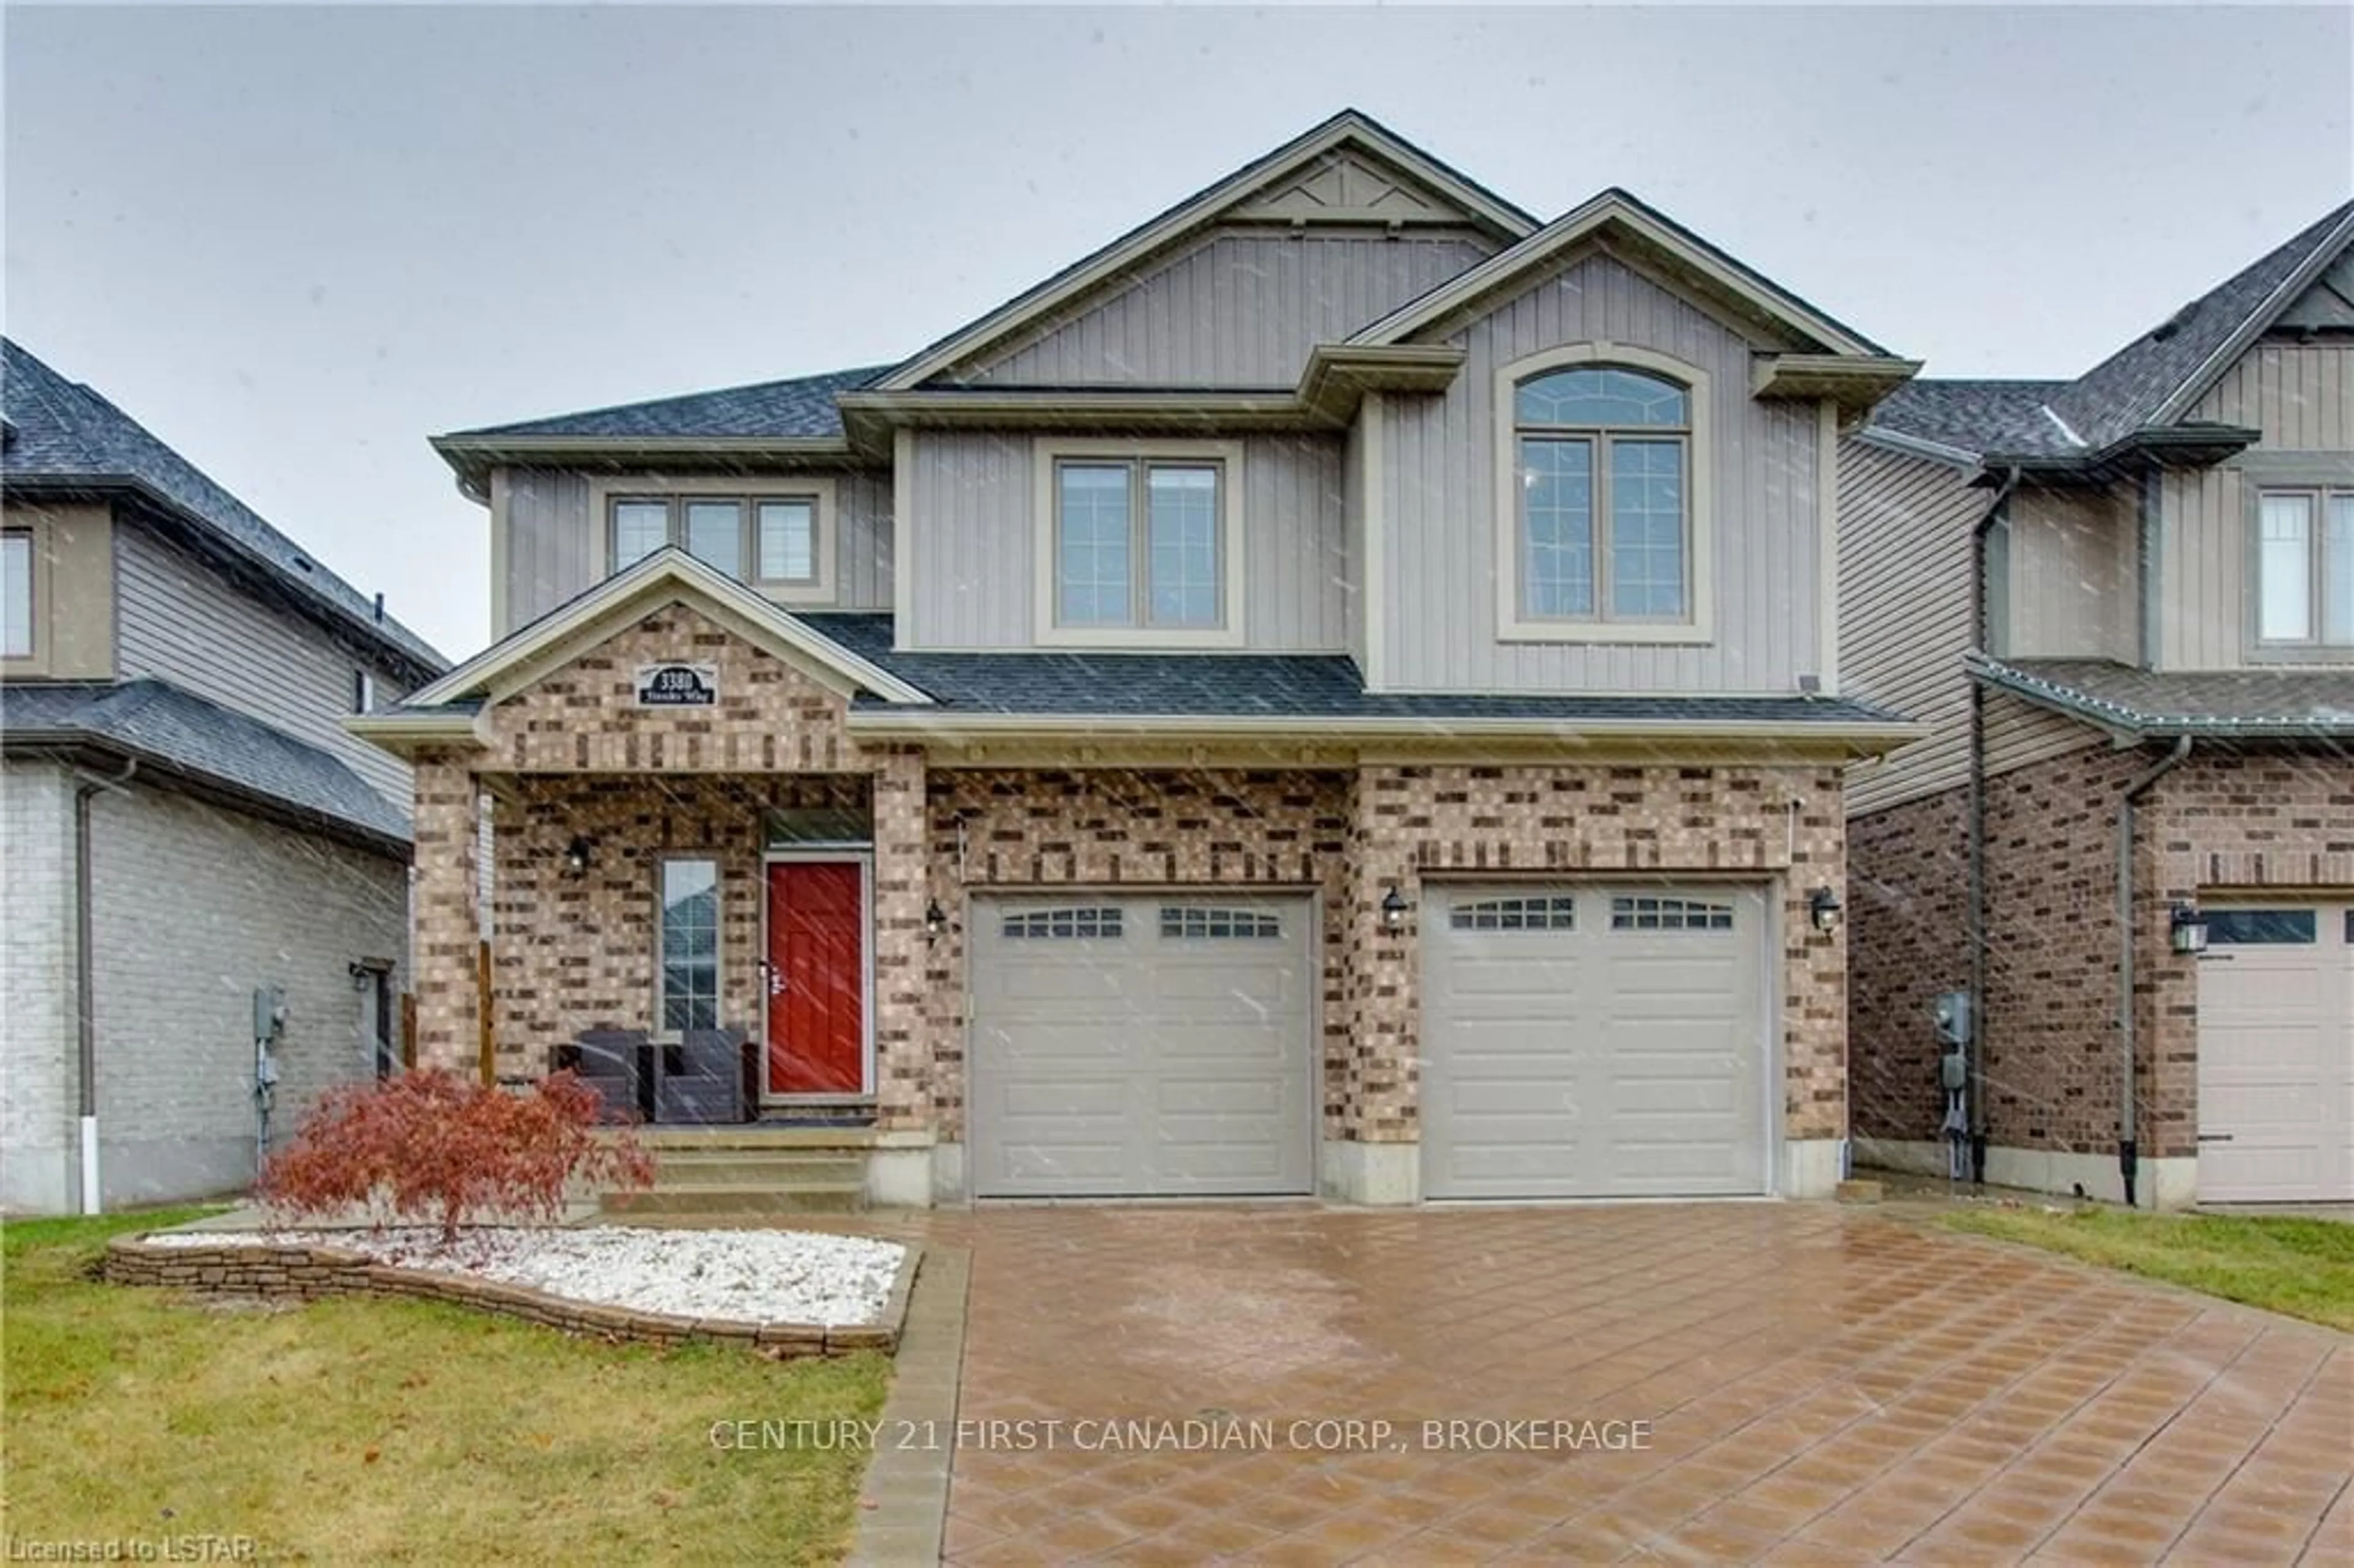 Home with brick exterior material for 3380 Jinnies Way, London Ontario N6L 0B8